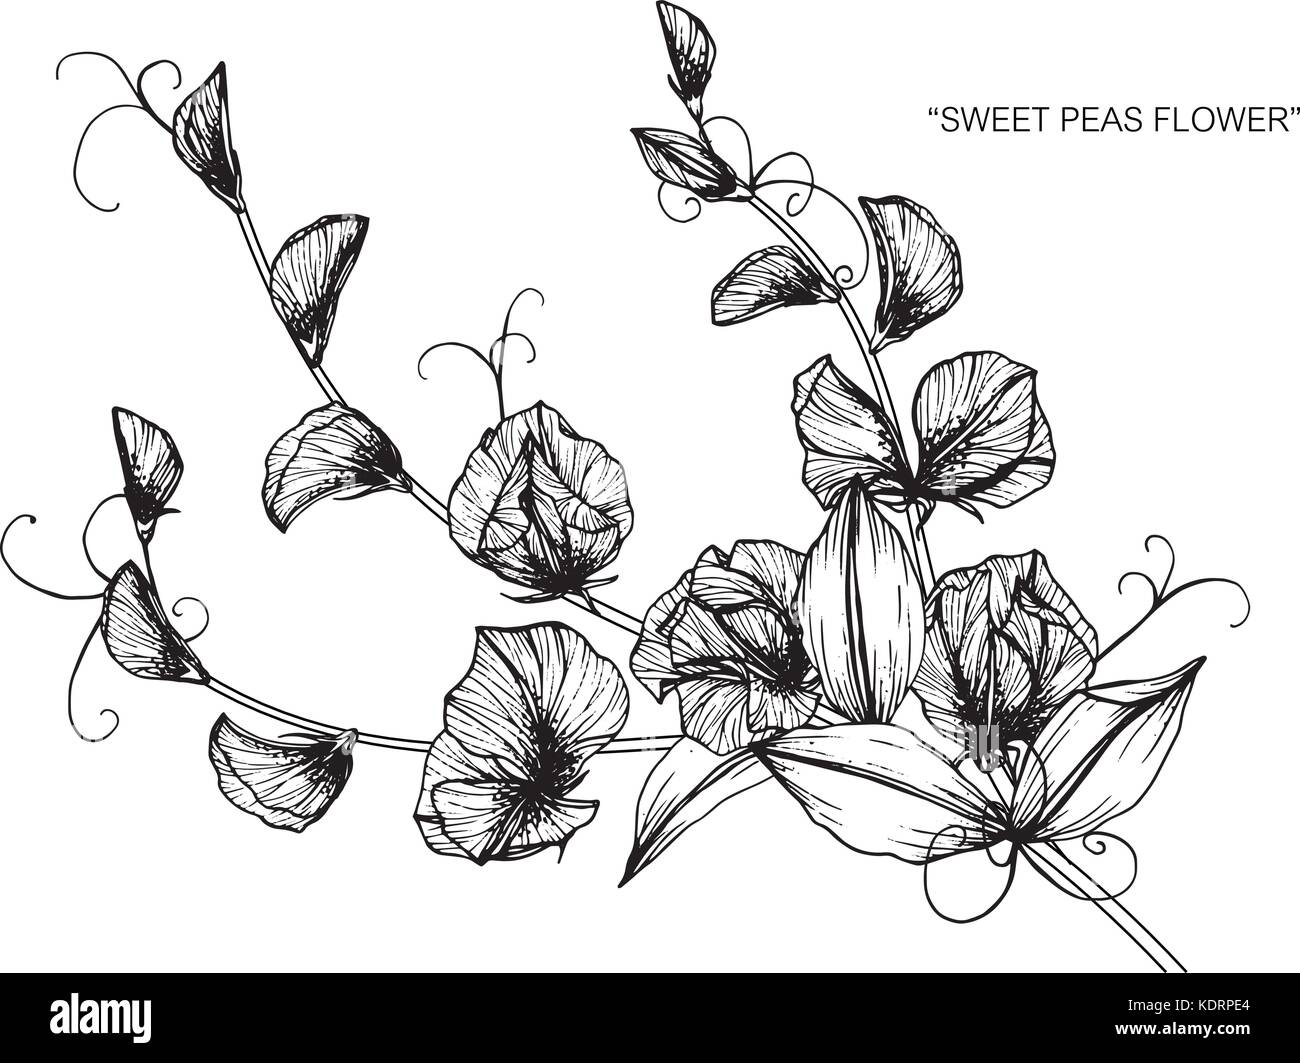 Vegetable, Illustration of Hand Drawn Sketch Fresh Indian Pea Plant with  Flower and Pods Isolated on..., Stock Vector, Vector And Low Budget Royalty  Free Image. Pic. ESY-040785863 | agefotostock